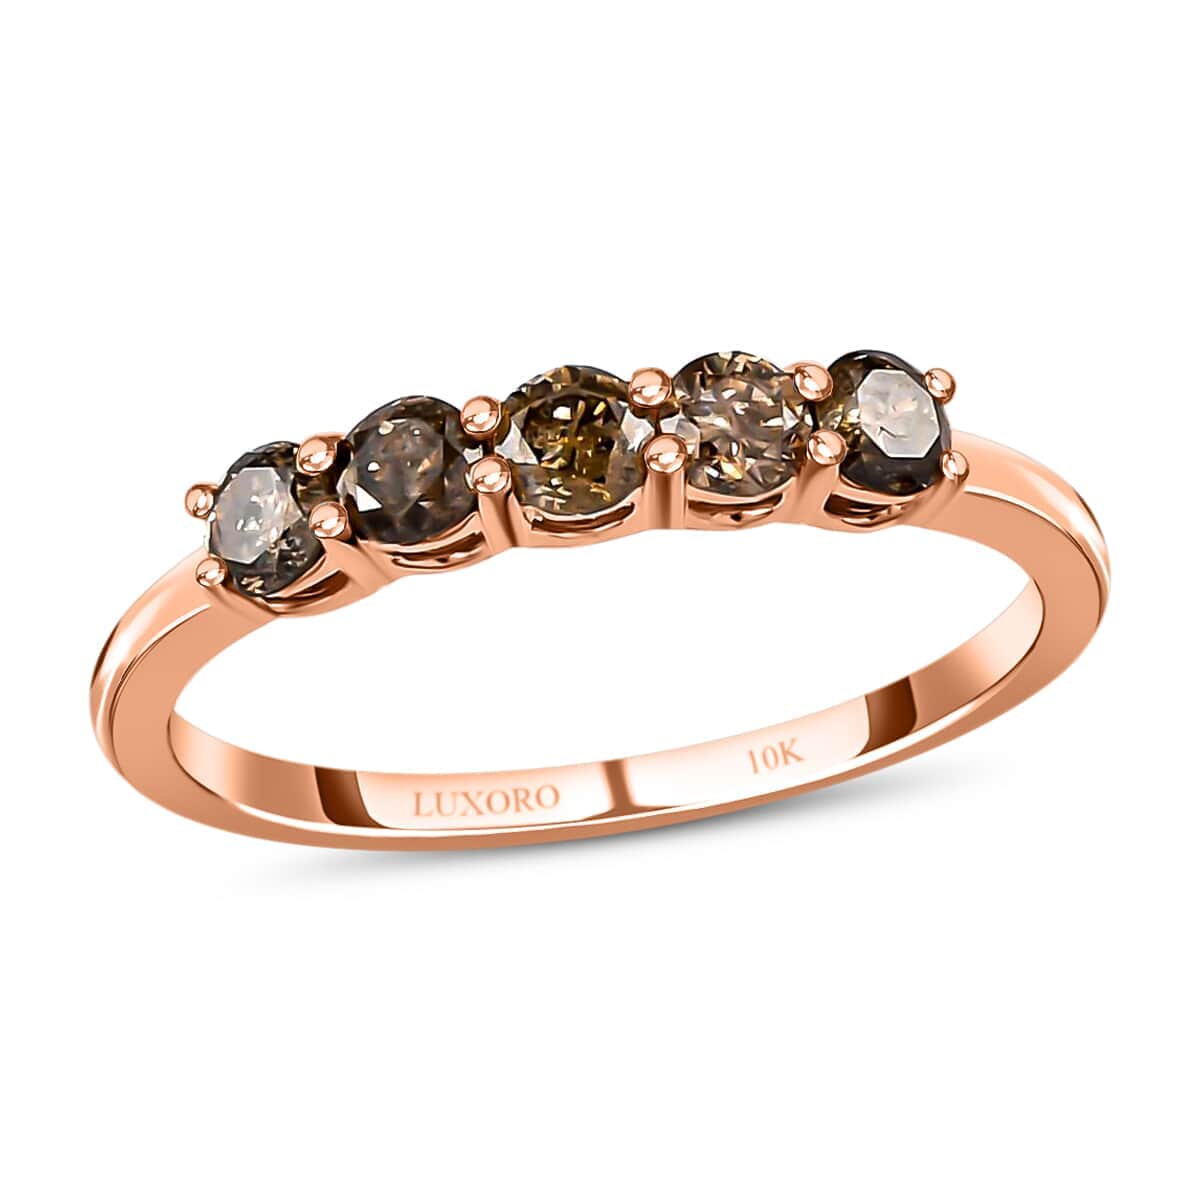 Luxoro  I3 Natural Champagne Diamond Ring, 10K Rose Gold Ring, Diamond 5 Stone Ring, Diamond Jewelry For Her, Gold Gifts 0.50 ctw image number 0